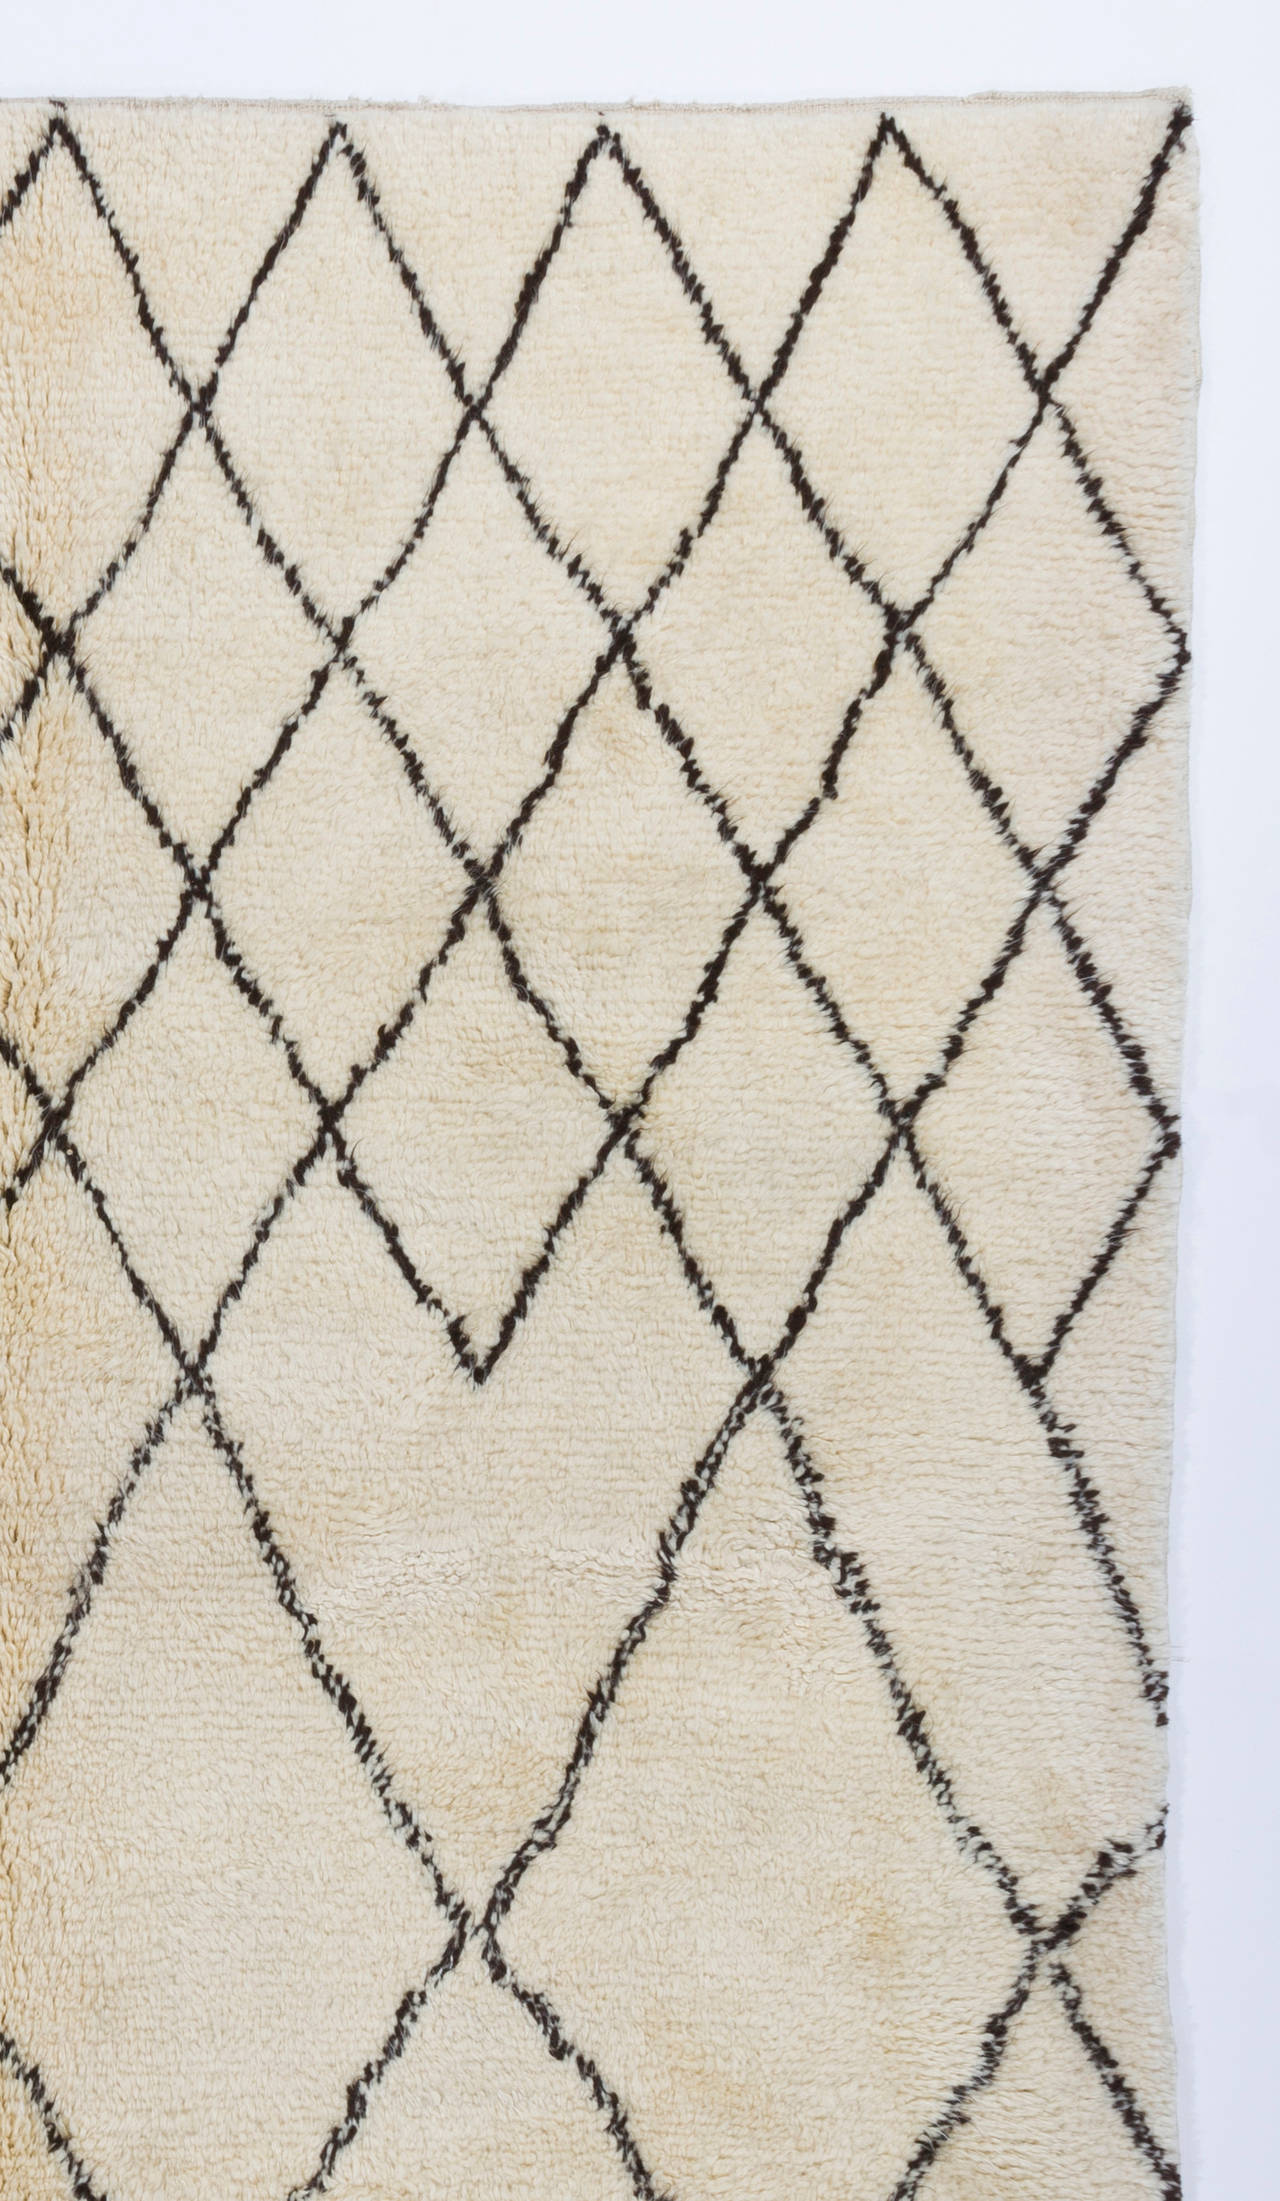 A contemporary handmade Moroccan rug with thick soft pile, made of natural undyed ivory/cream and brown wool.
The rug is made-to-order and customizable. We can make it in any size, pile hight, color combination and design of your choosing with fine